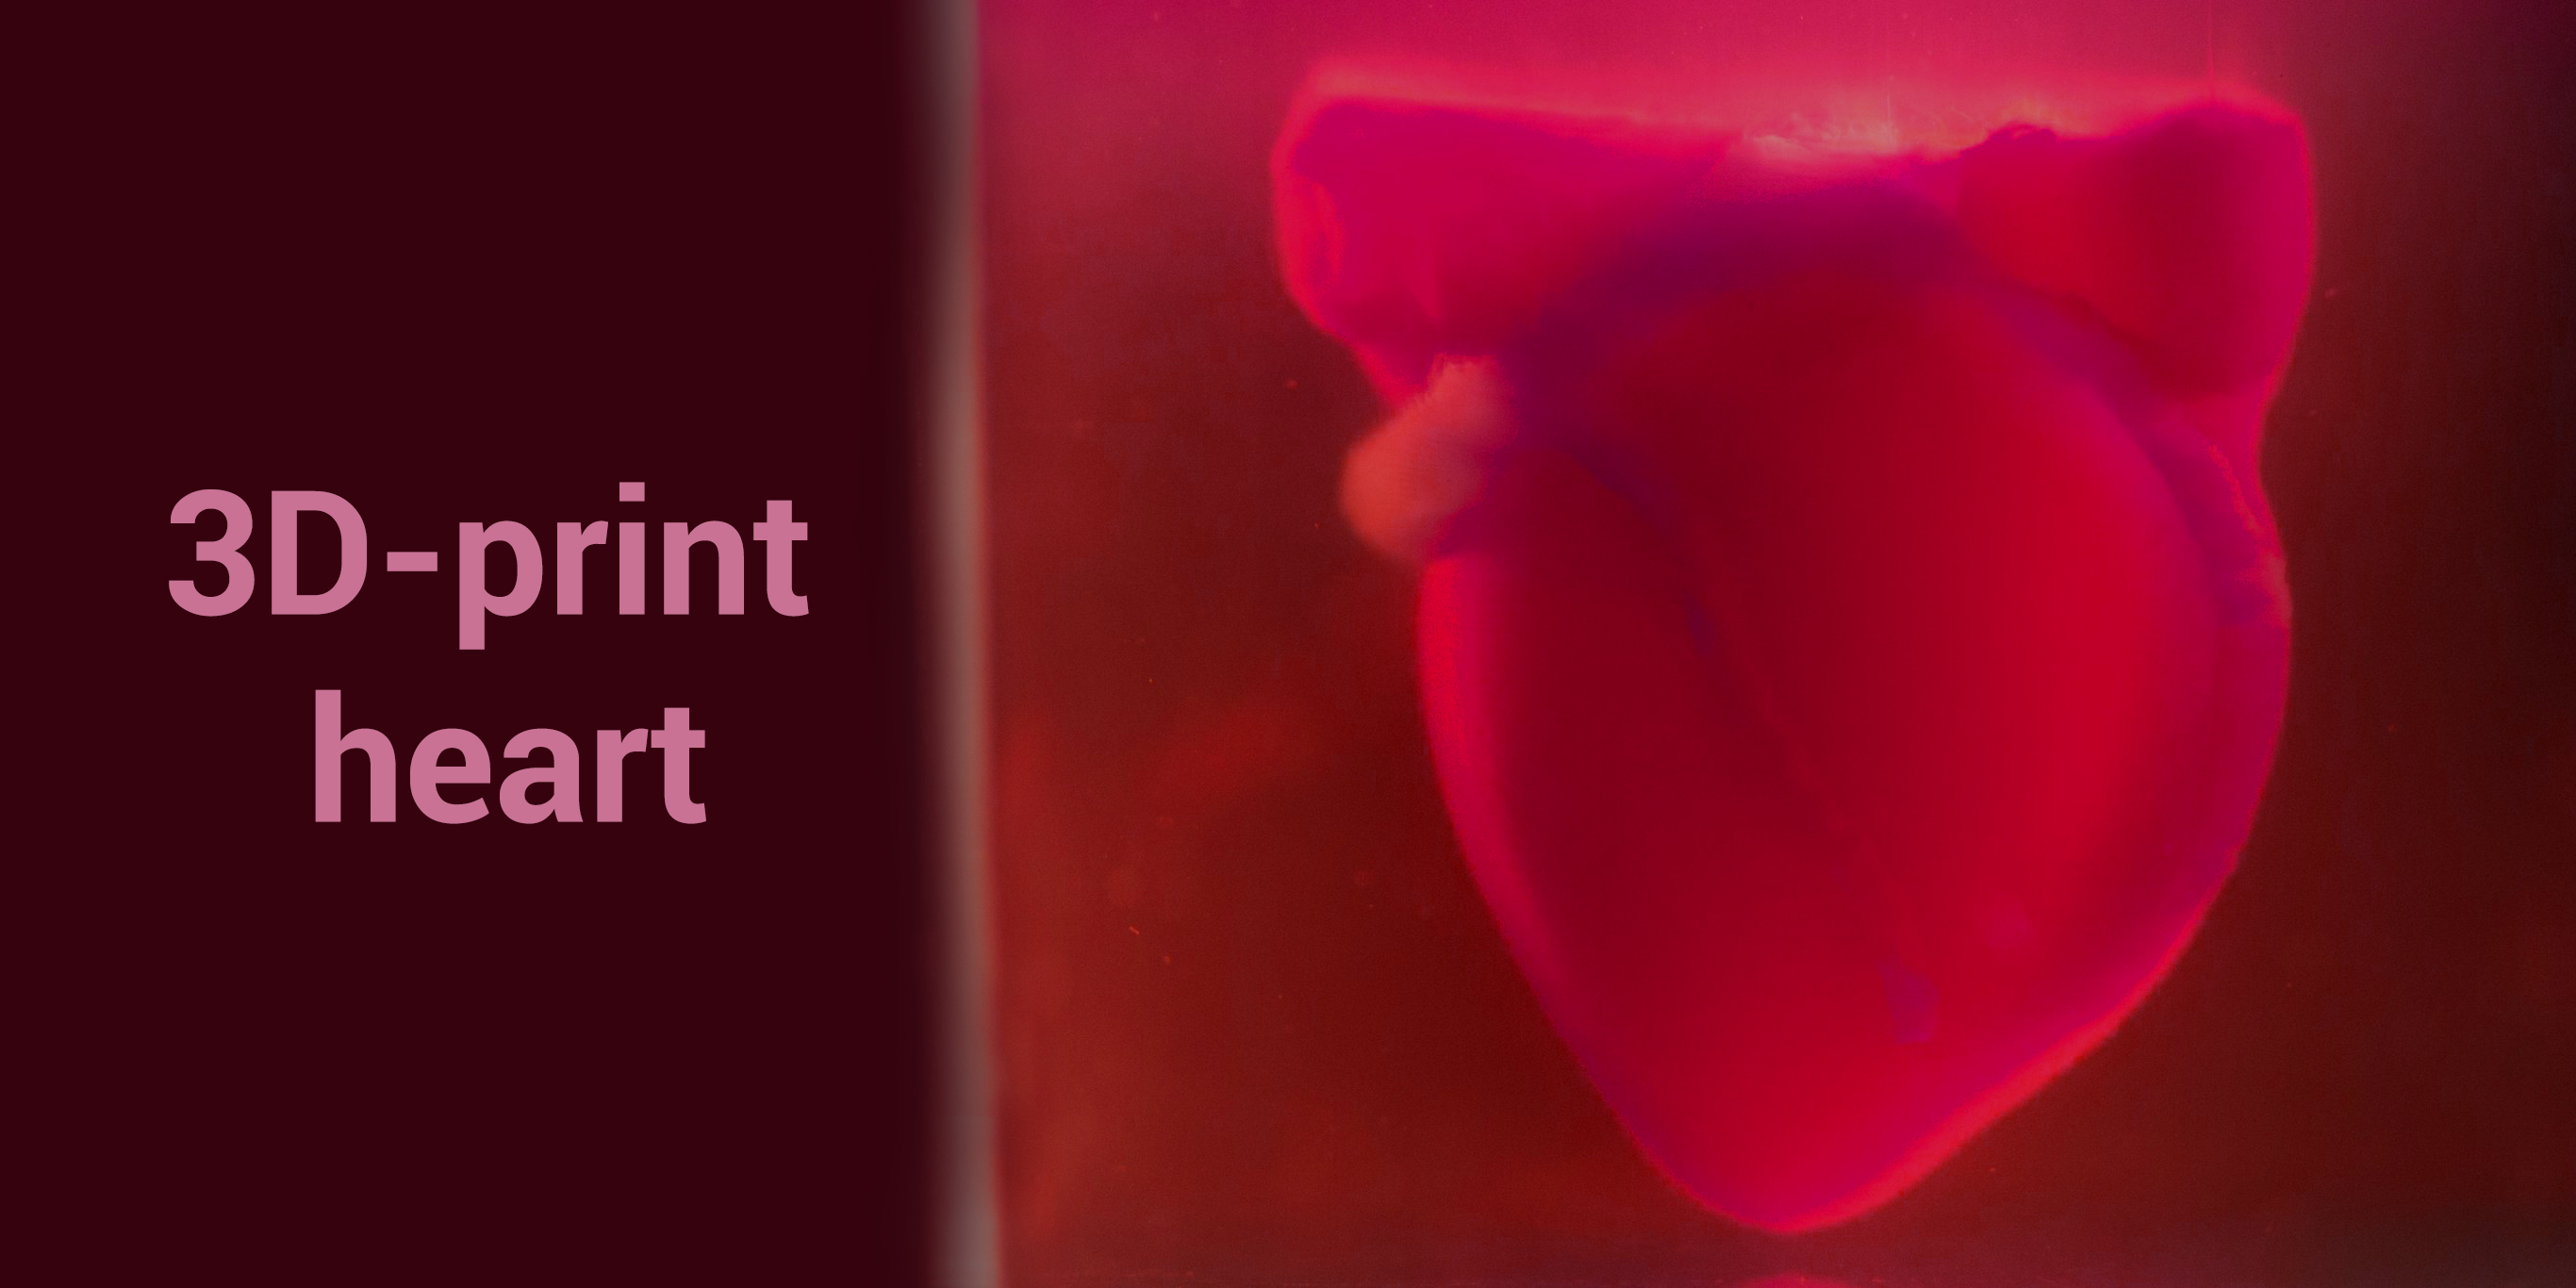 Human Patient’s Cells Used to create 3D-Printed Heart